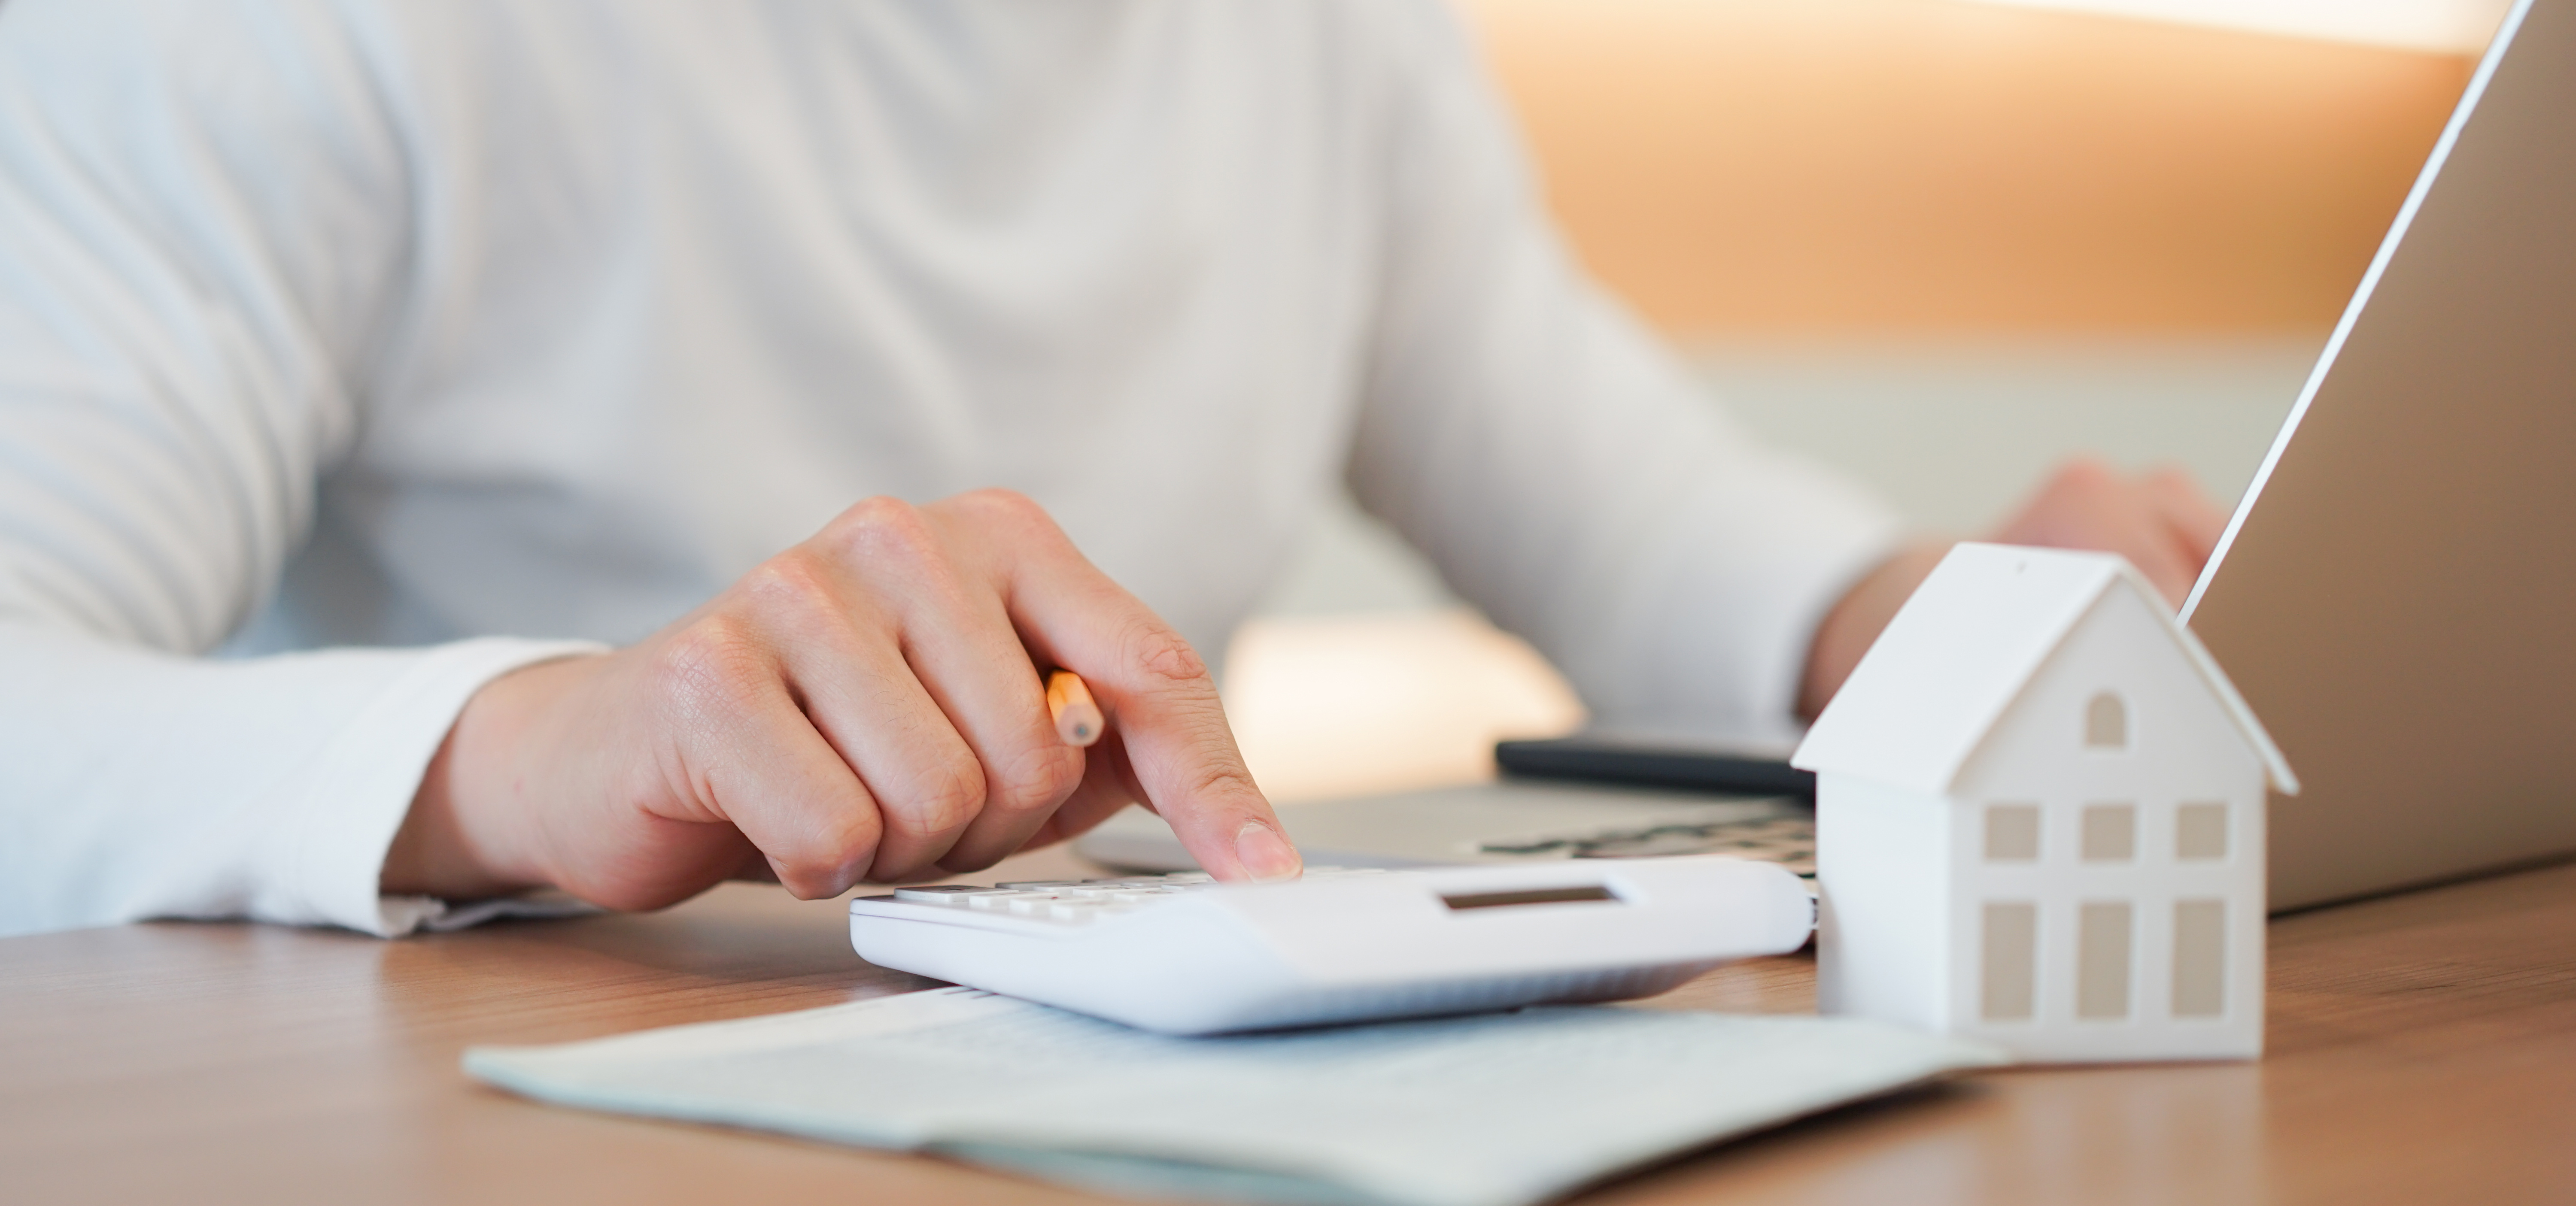 Once your deposit and budget are at the ready, you’ll be able to gauge how much you can borrow